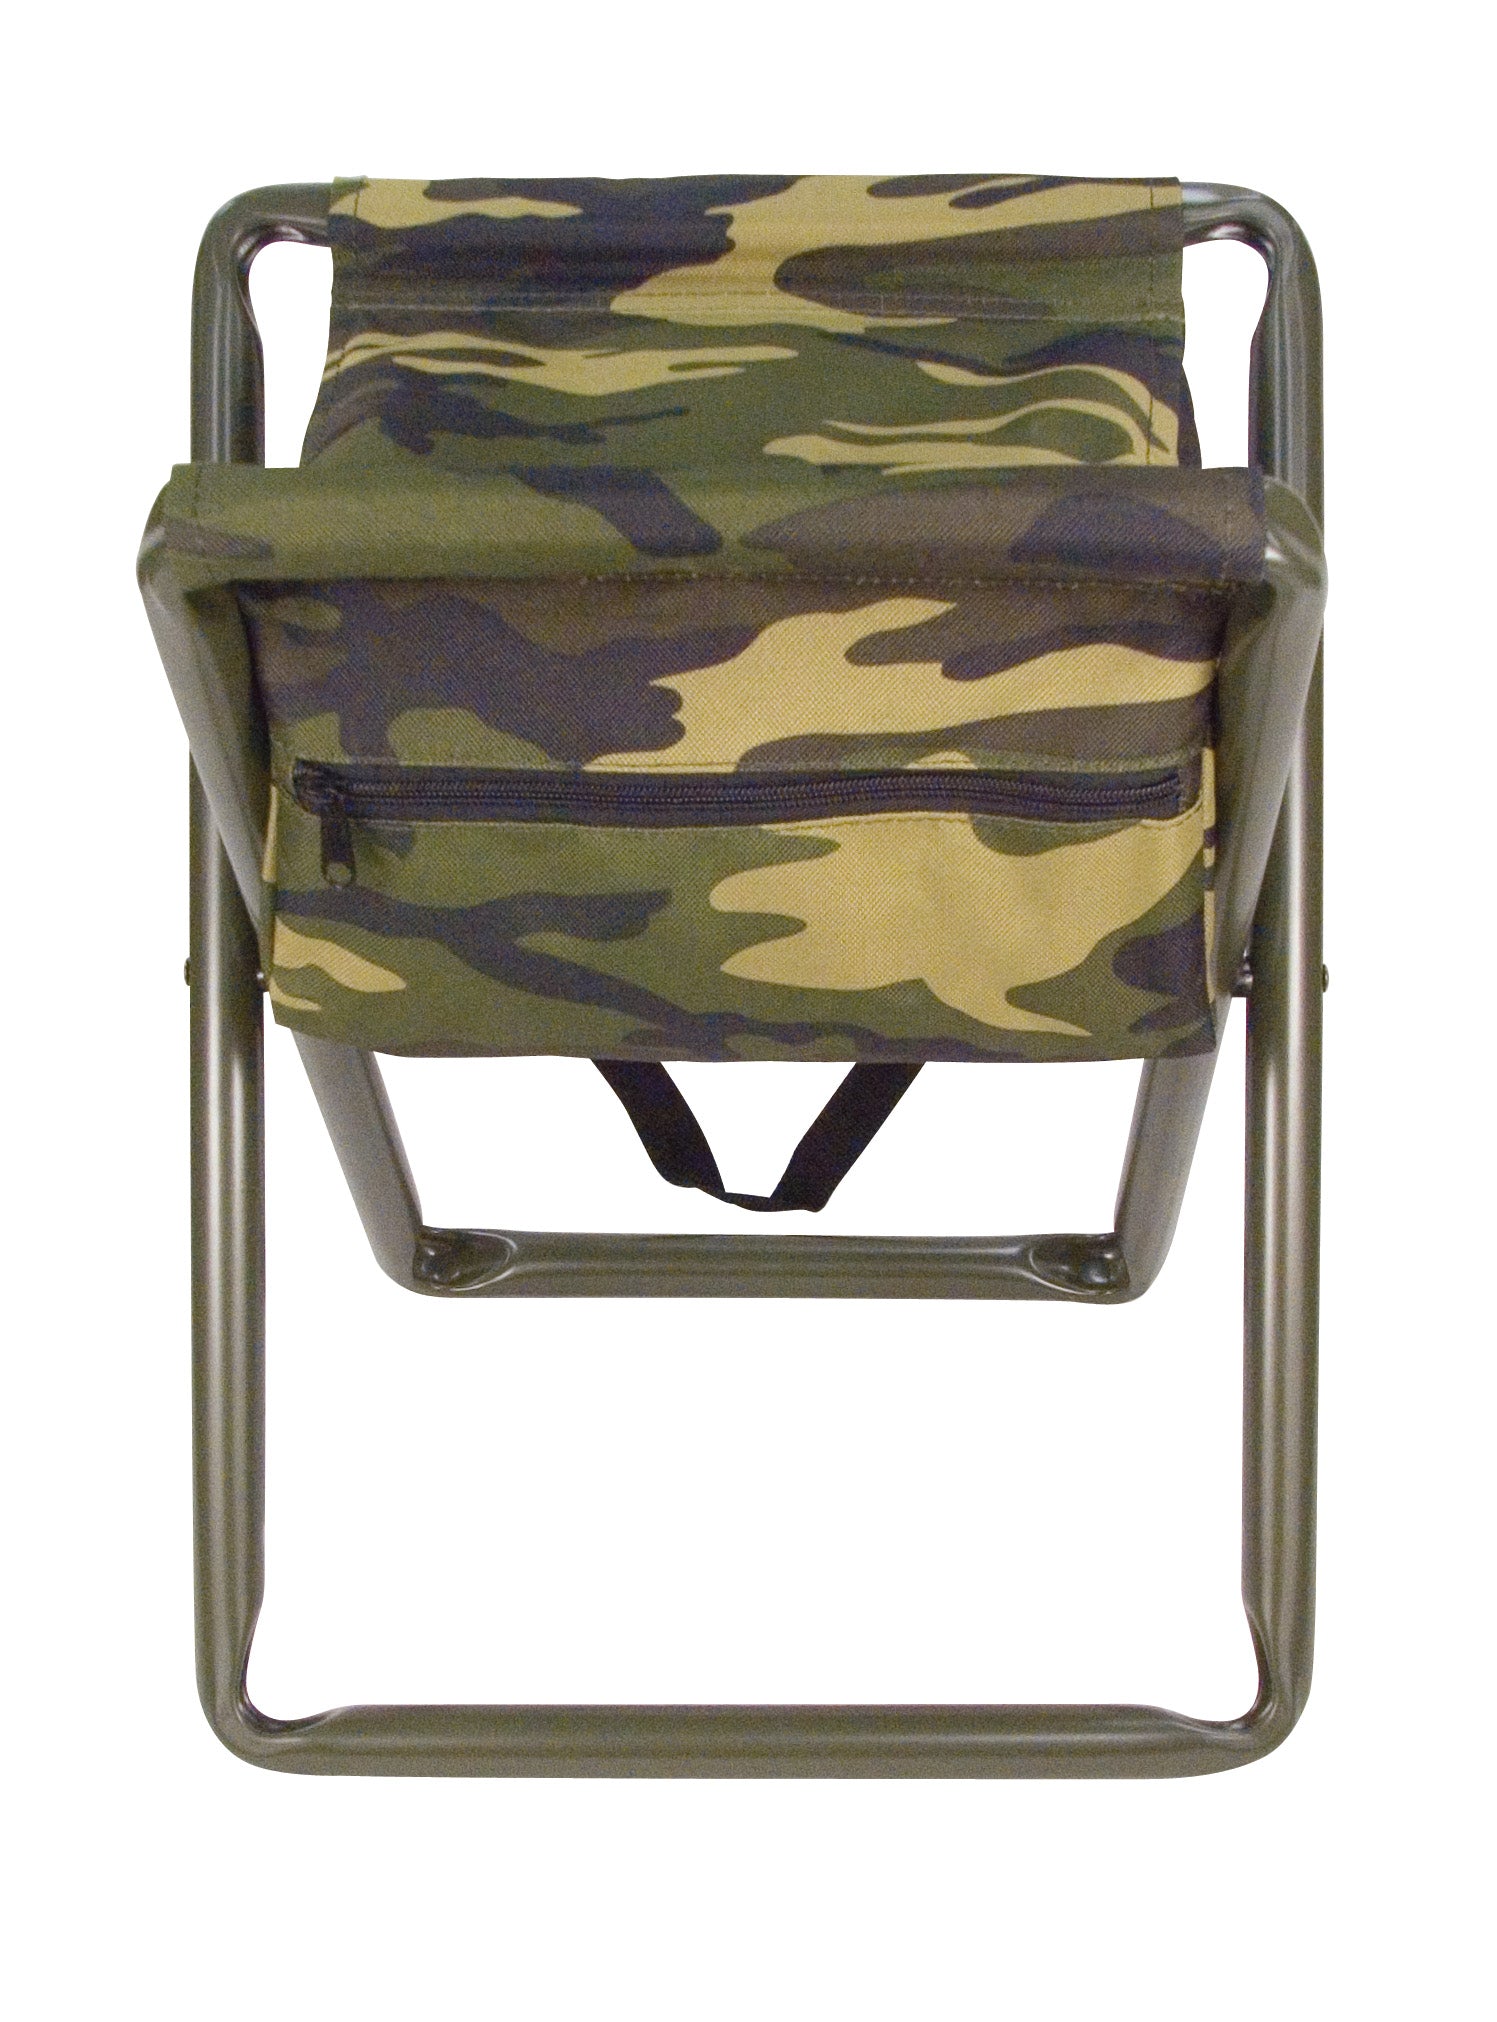 Milspec Deluxe Stool With Pouch Camp Stools & Chairs MilTac Tactical Military Outdoor Gear Australia